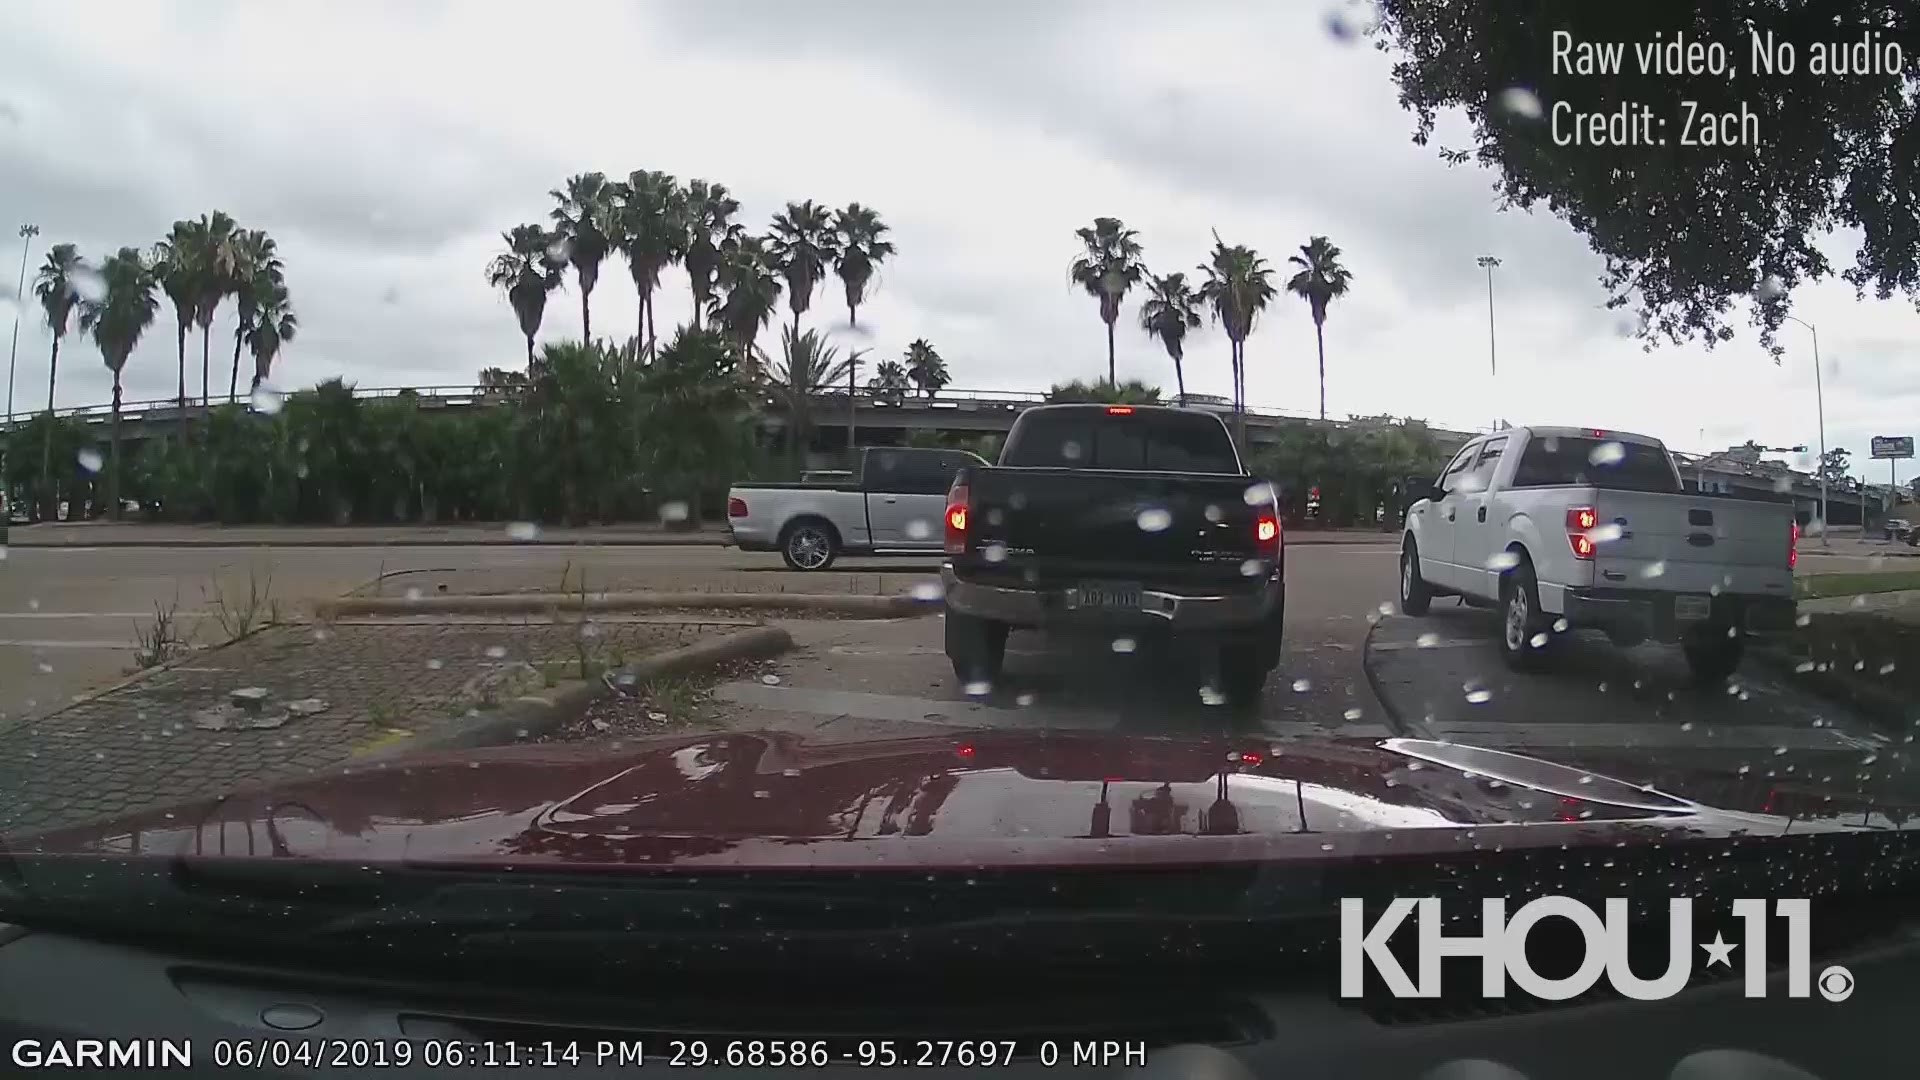 Watch as a truck driver "threads the needle" between a Metro bus and another driver on the Gulf Freeway frontage road. Credit: Zach via Reddit